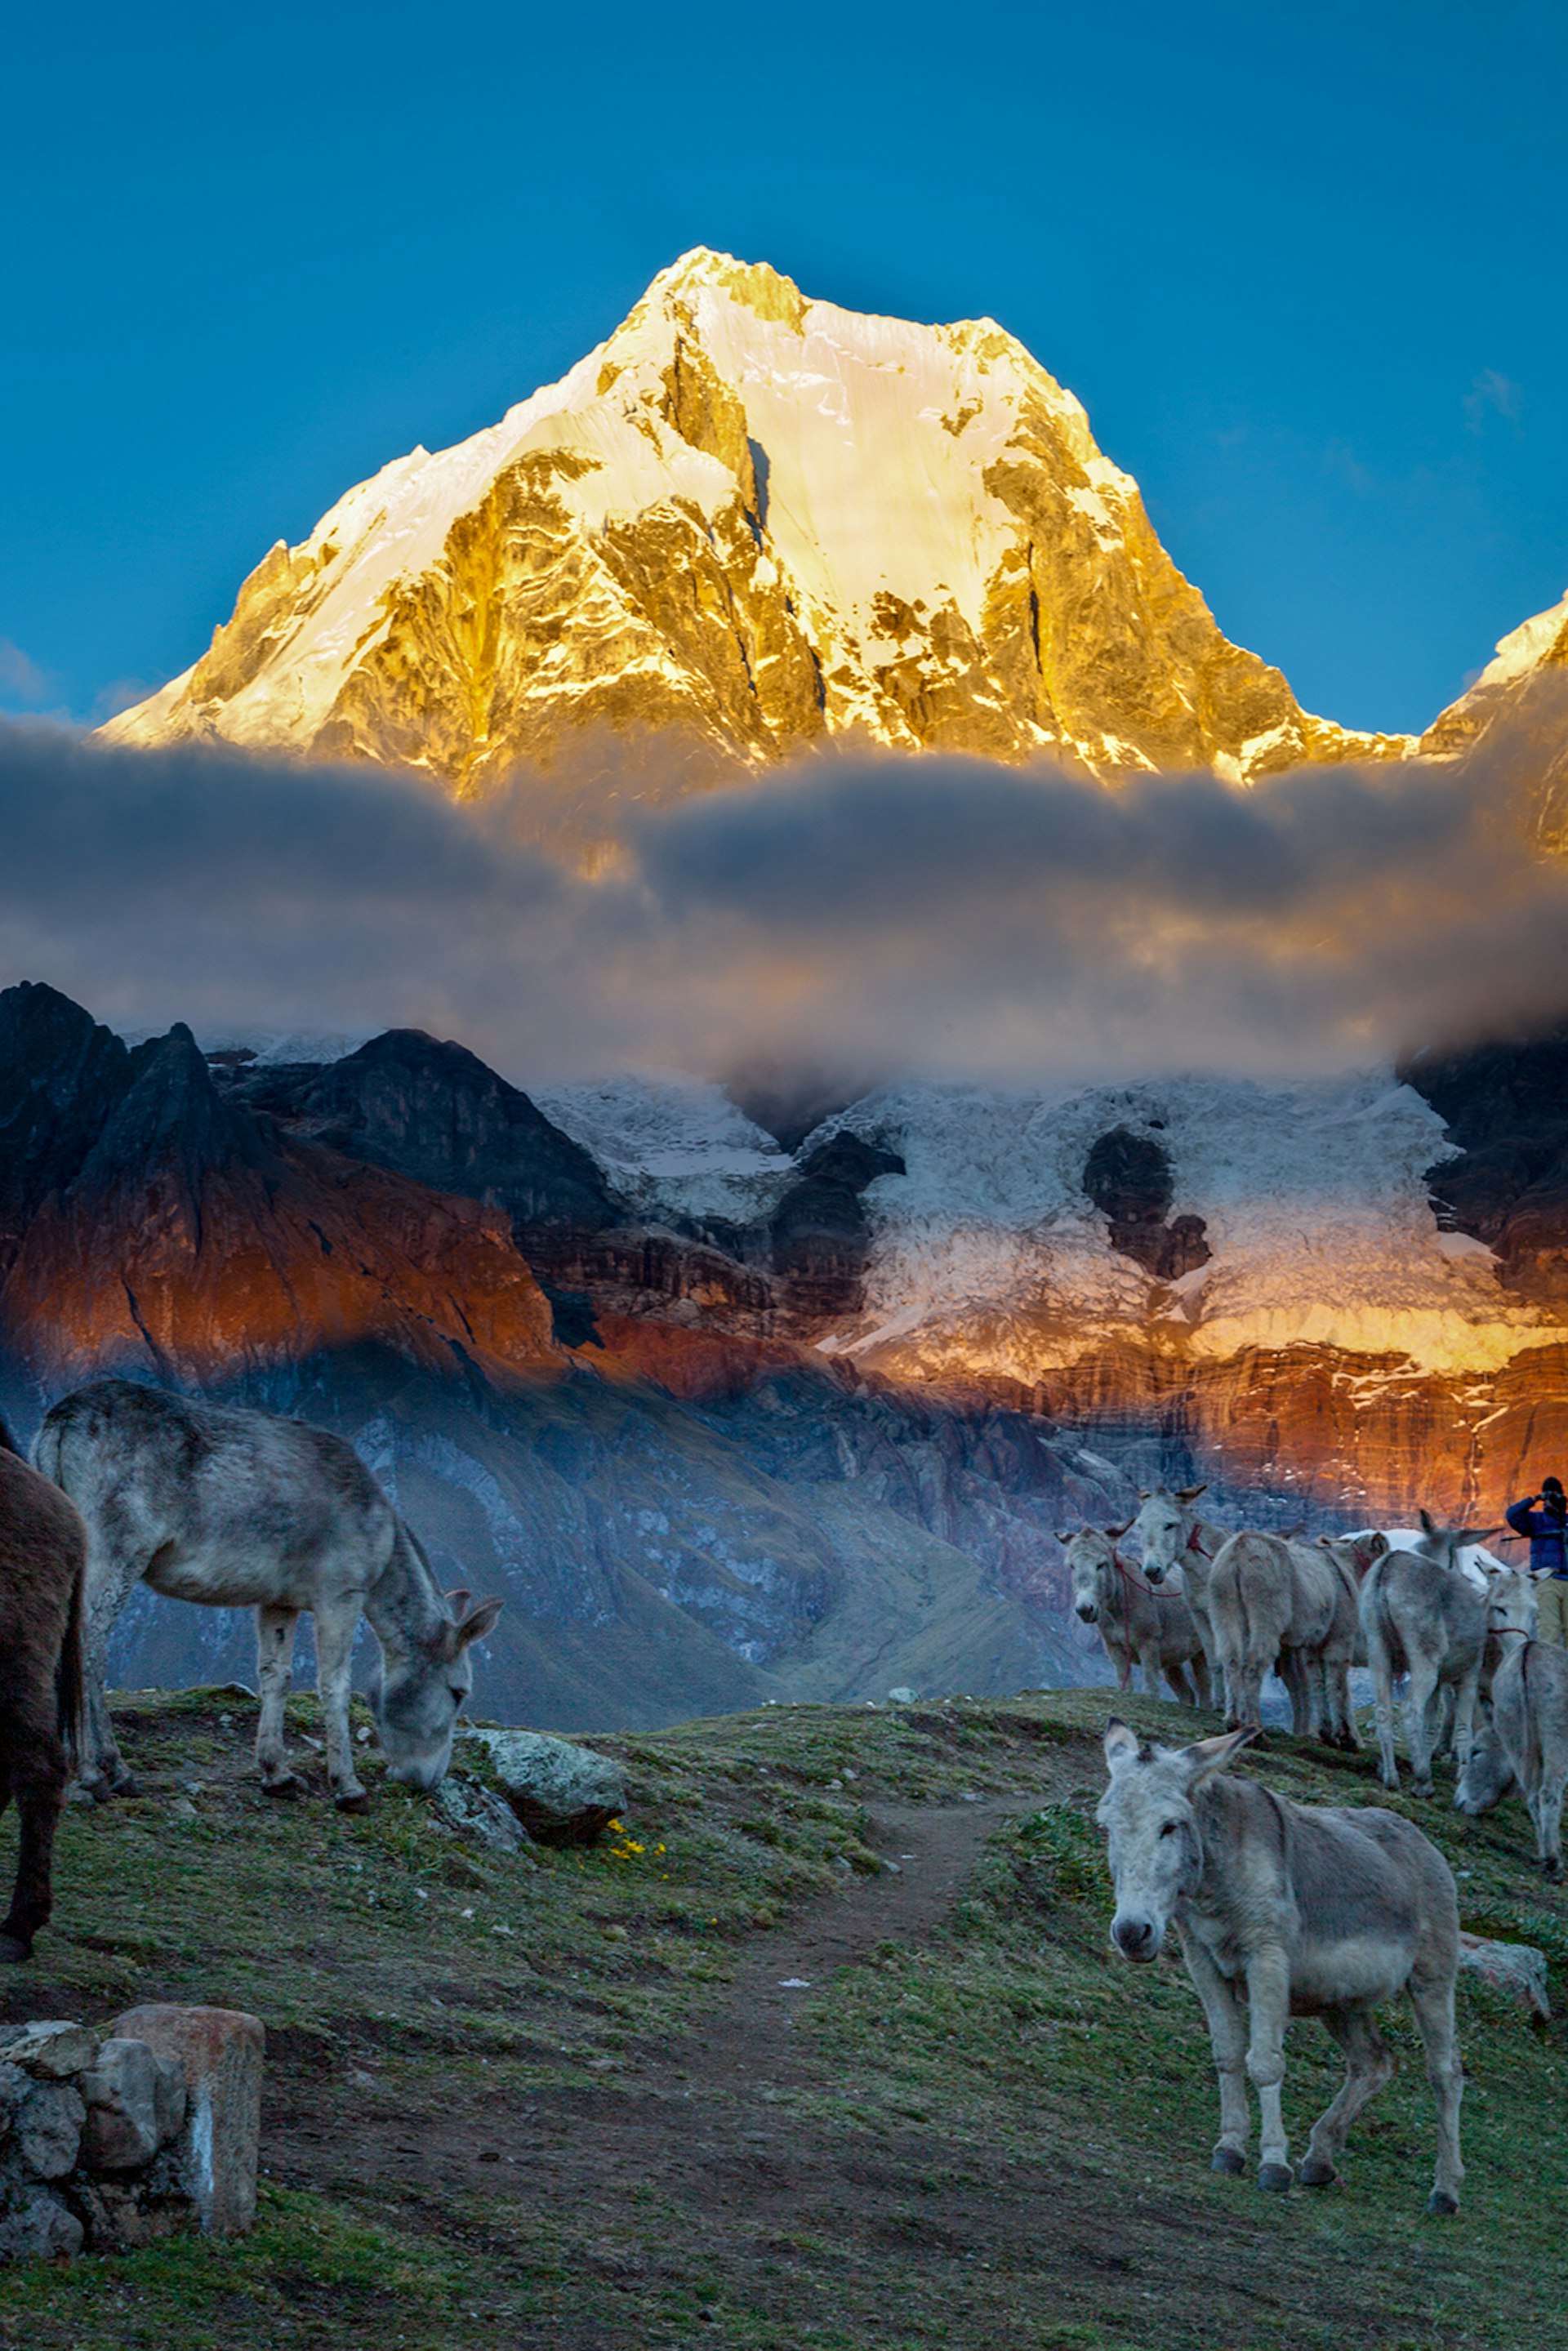 Donkeys graze as the sun hits a snow Huayhuash peak in the background © Kesterhu / Getty Images